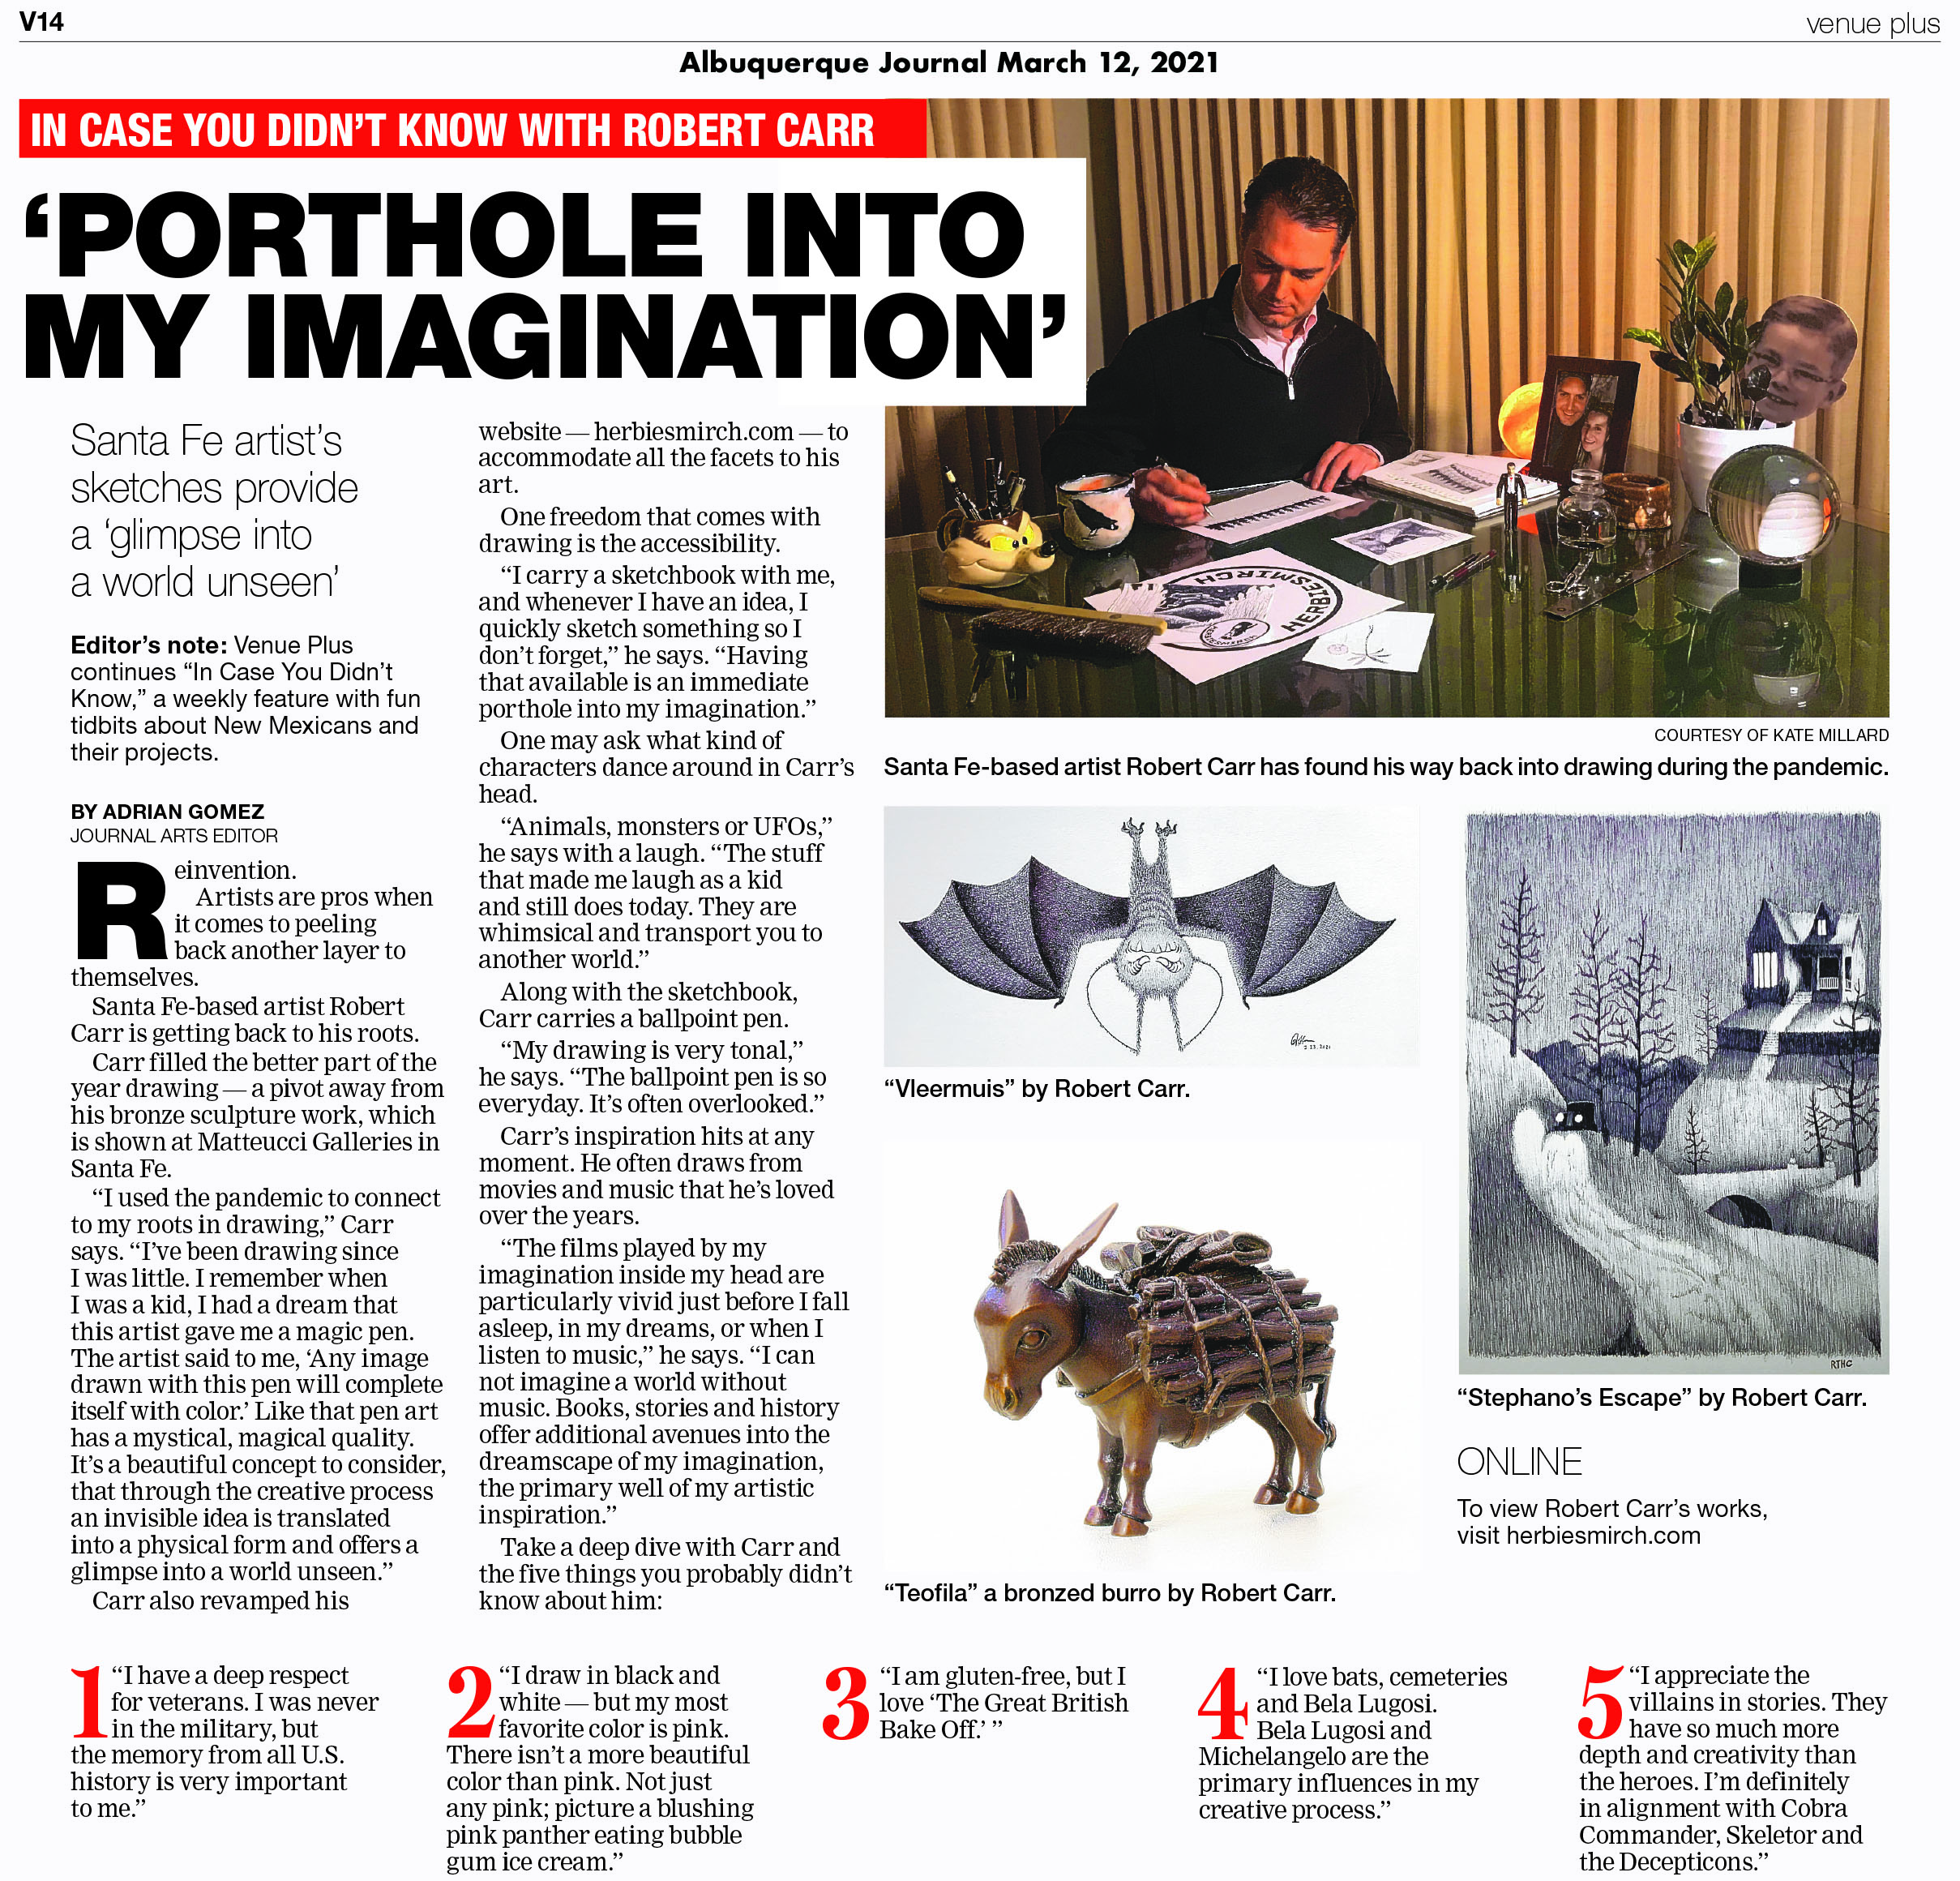 ABQ Journal, Porthole into My Imagination, Friday, March 12, 2021